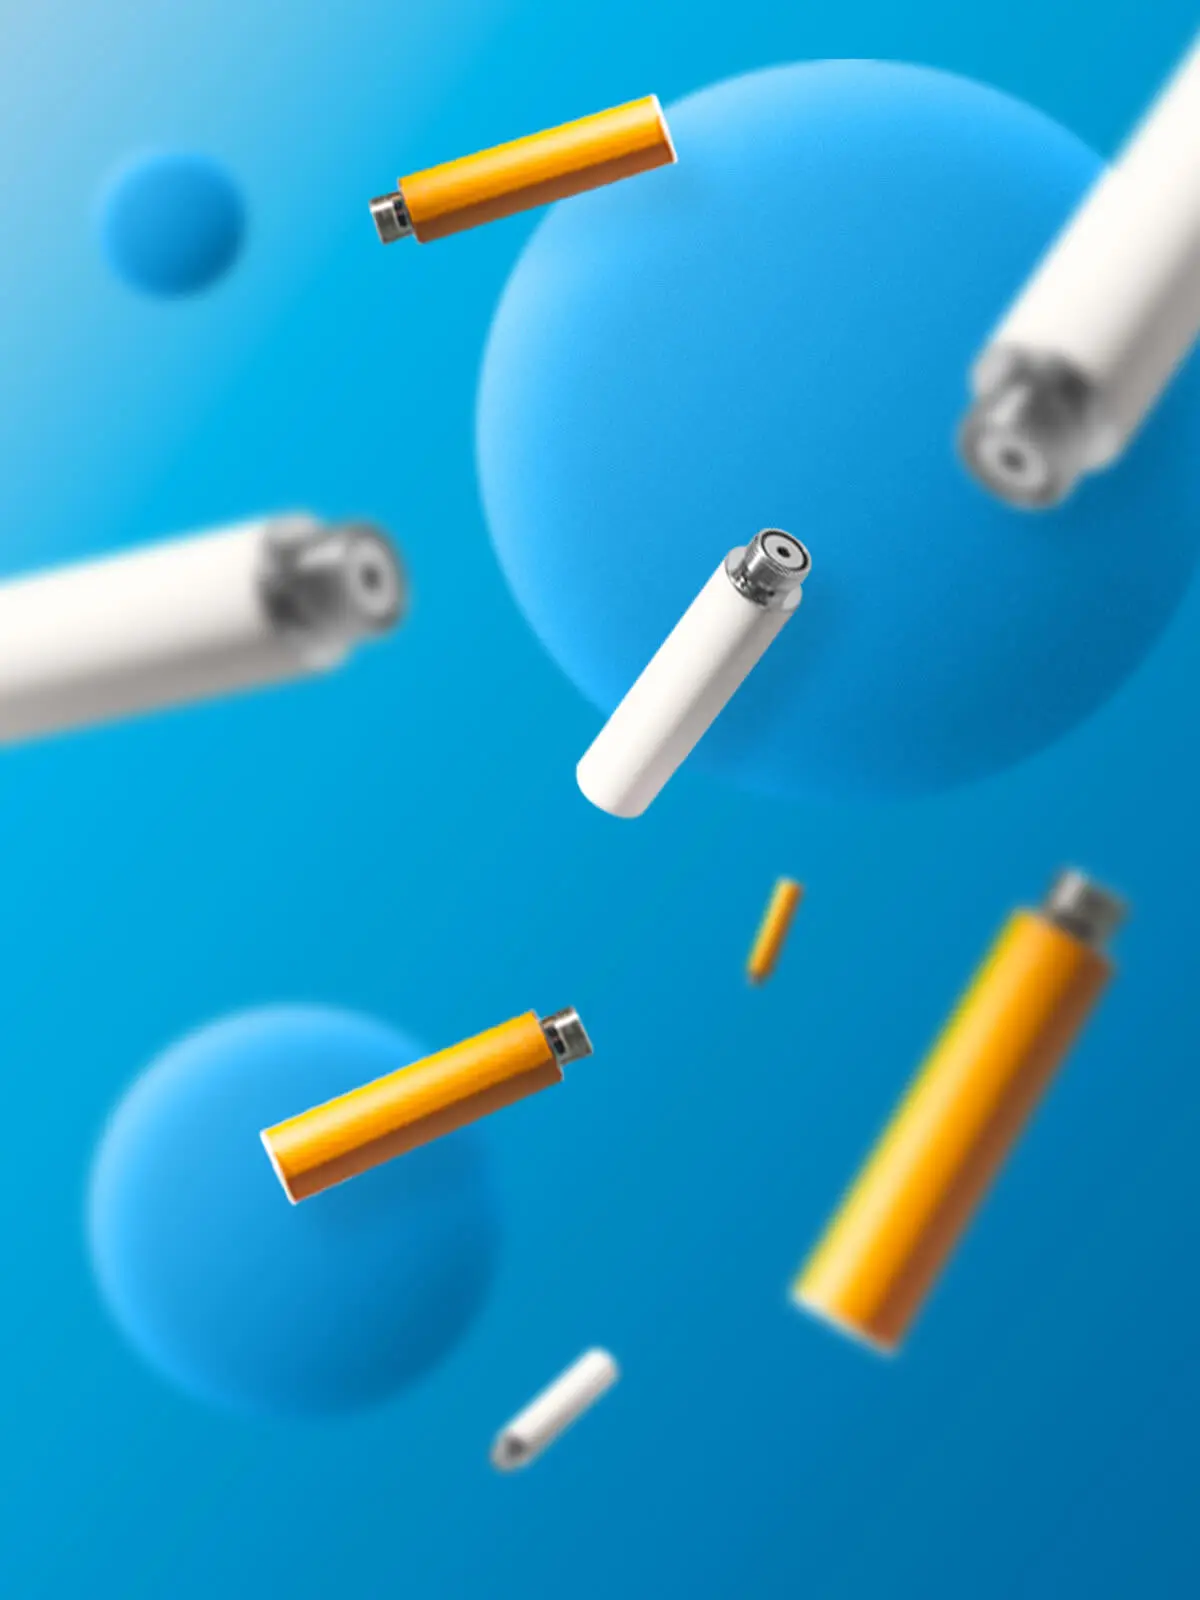 Menthol and Tobacco OK Vape cartridge refills, floating in front of a blue background